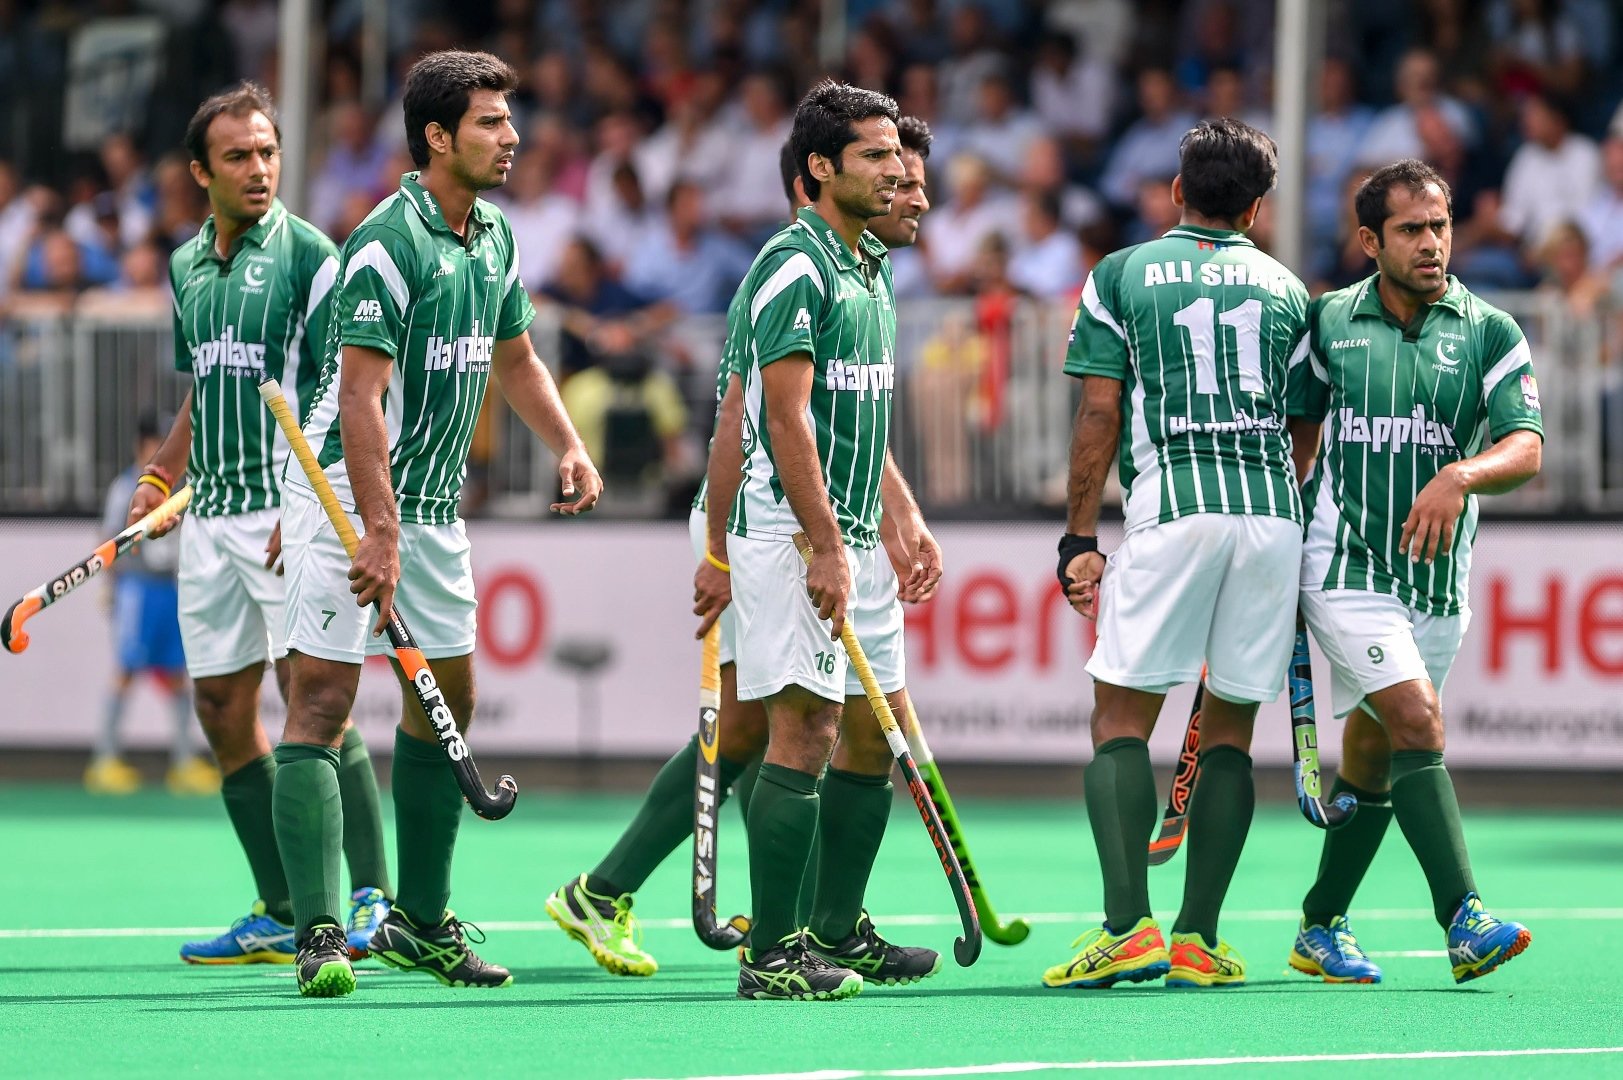 pakistan 039 s players look on during the group a field hockey match between pakistan and india of the men 039 s group stage of the world league semi final in brasschaat on june 26 2015 photo afp